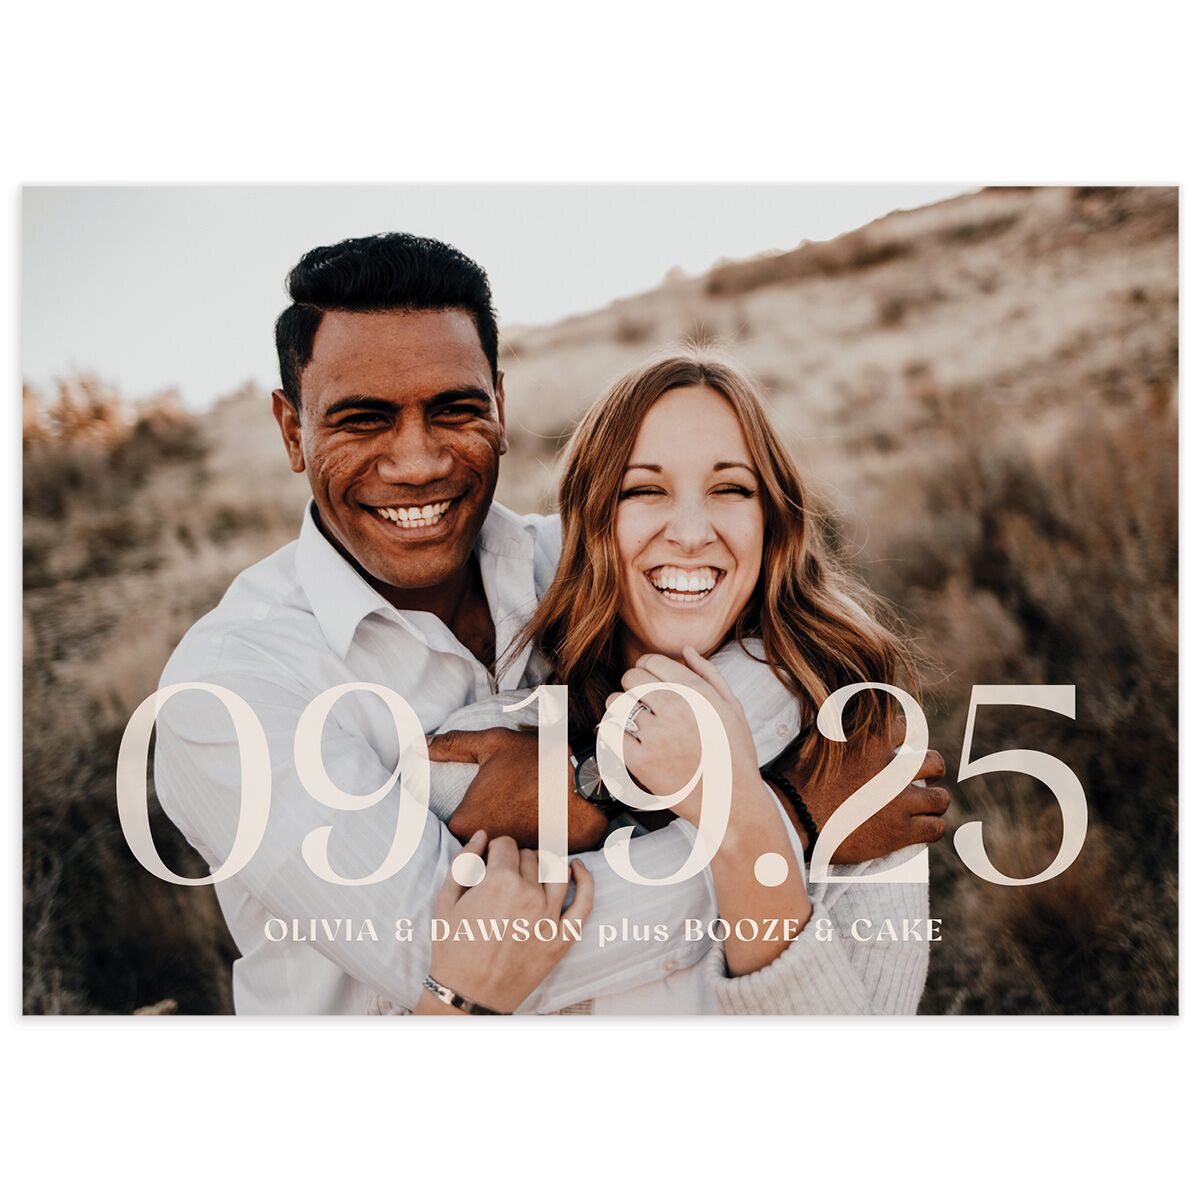 We've Waited Save The Date Cards